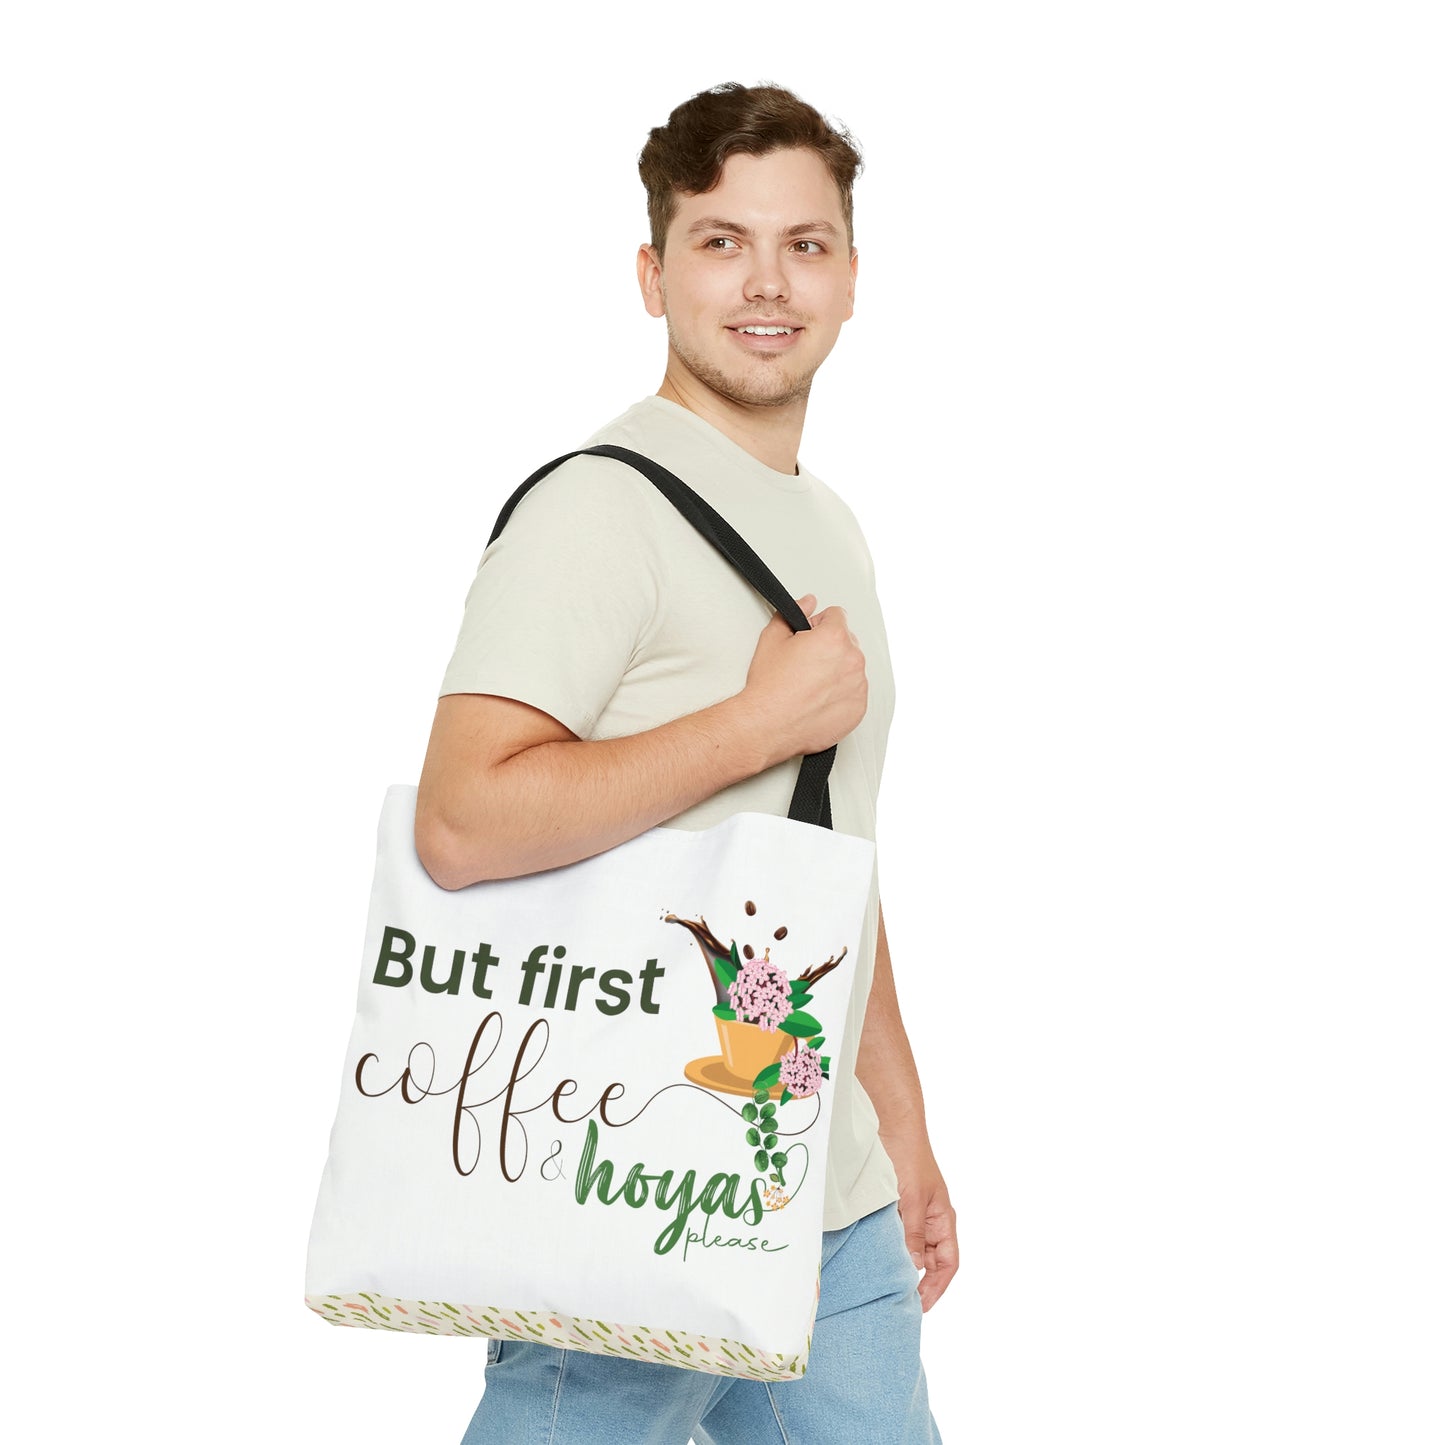 HOYAHOLIC BUT FIRST COFFEE AND HOYAS PLEASE TOTE BAG